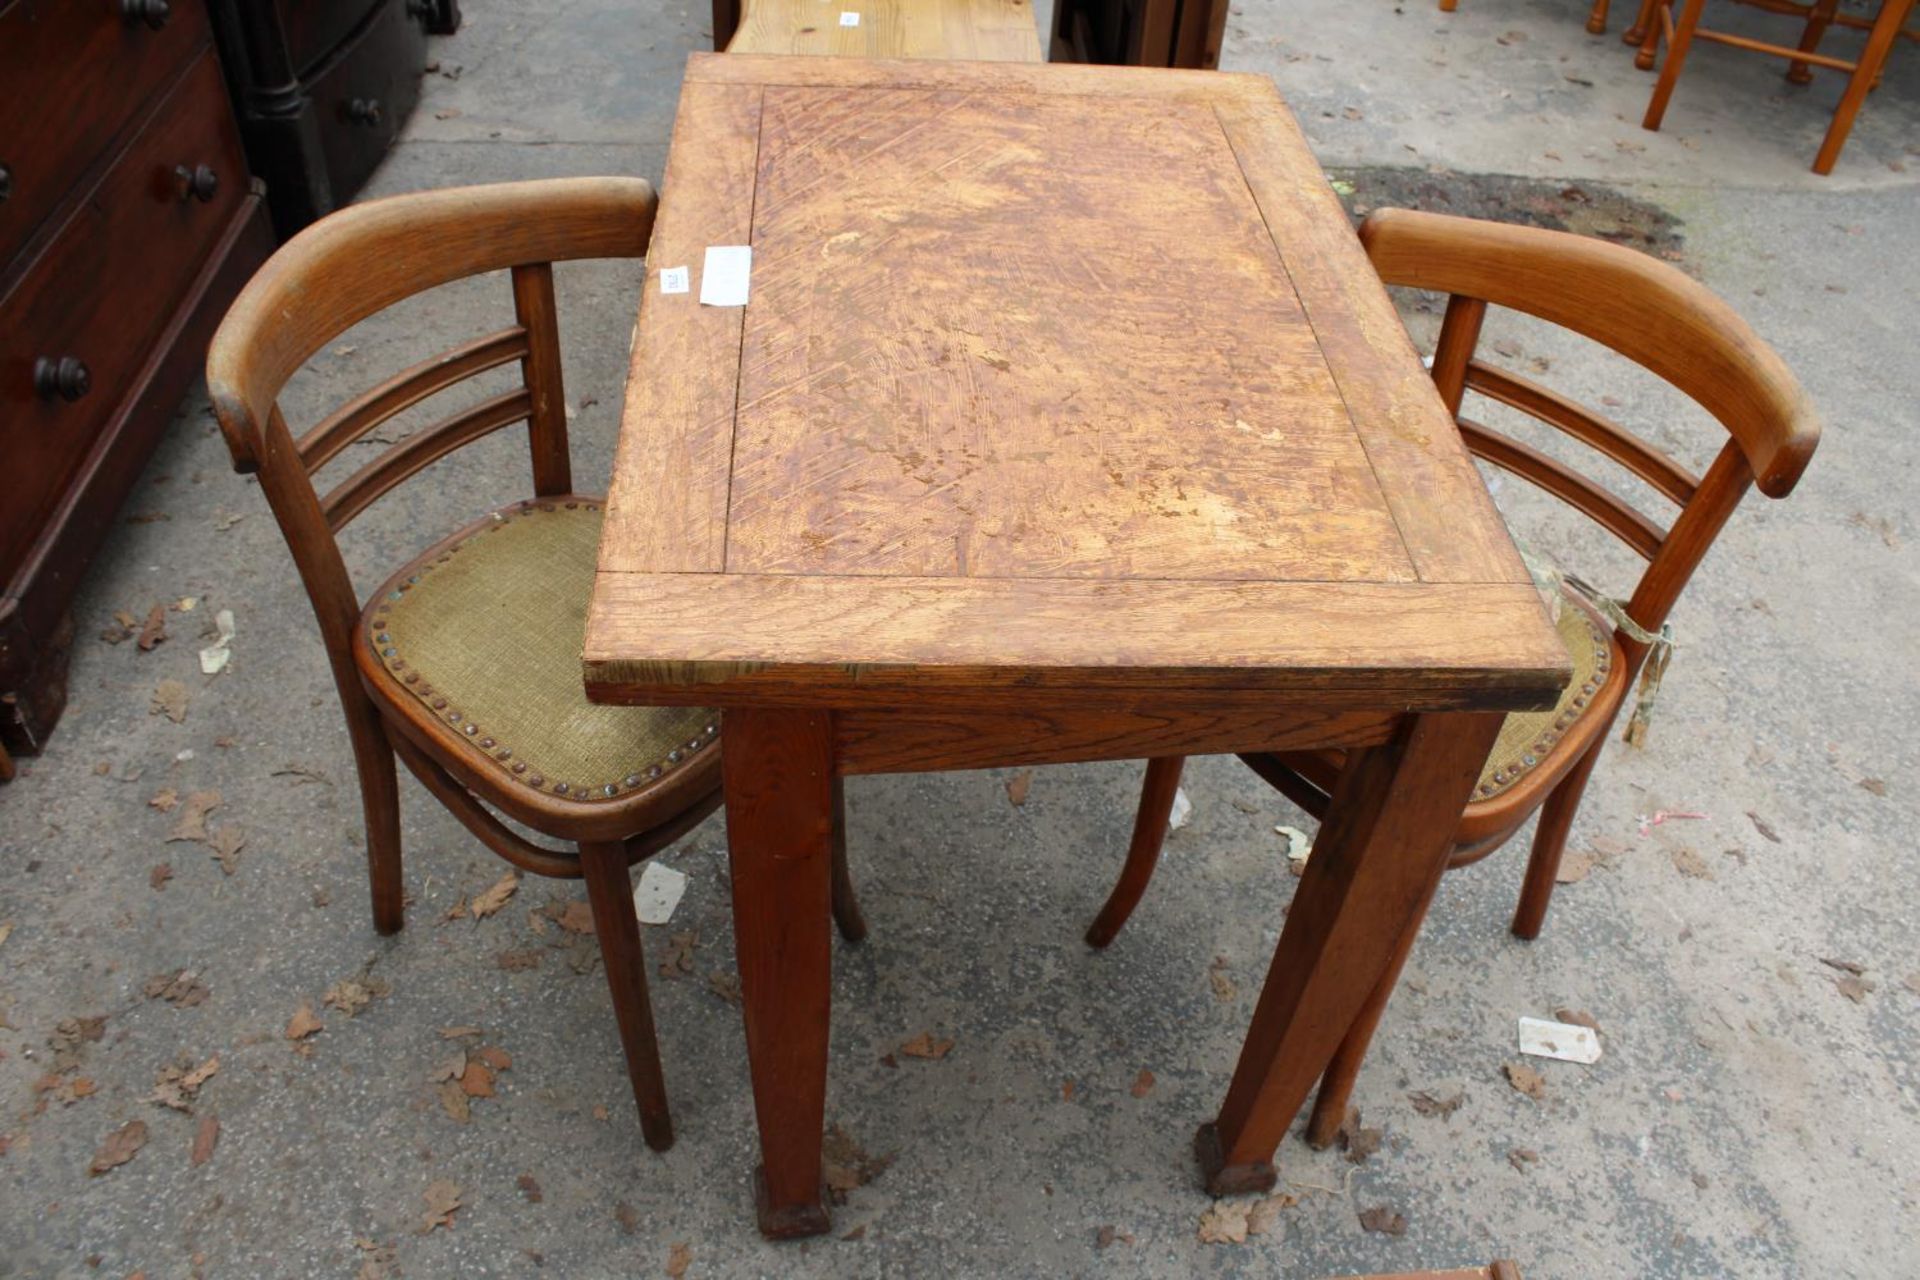 AN OAK FOLD OVER WORK TABLE AND A PAIR OF BENTWOOD CHAIRS